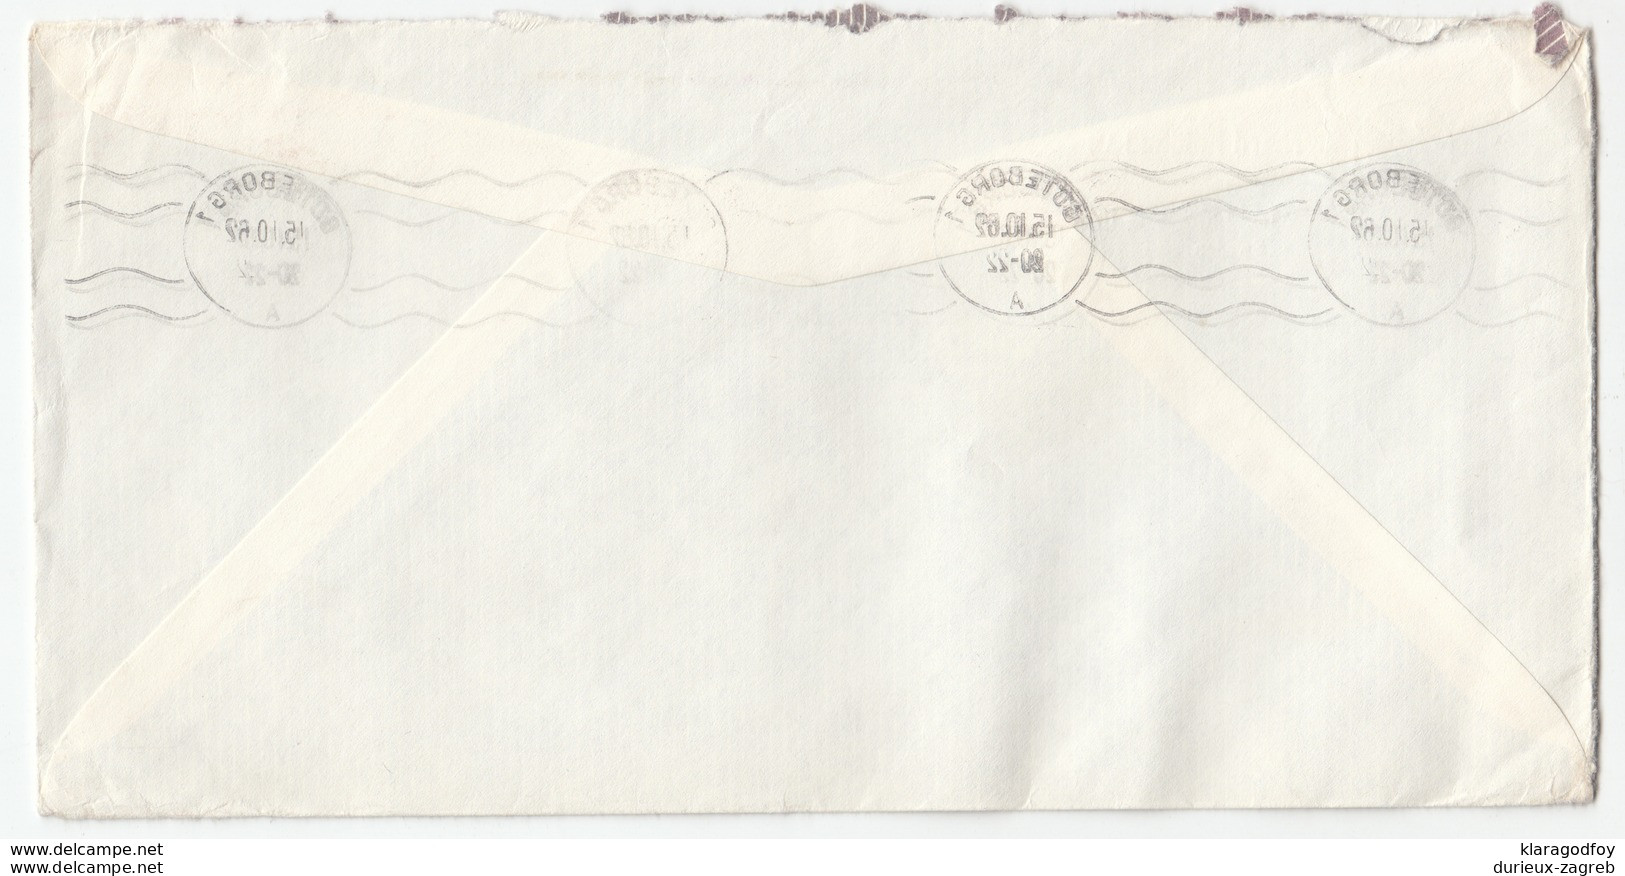 Sweden, Gerhard Rohland AB Company THREE Letter Covers Airmail Travelled 1962 Göteborg Pmk B170429 - Covers & Documents